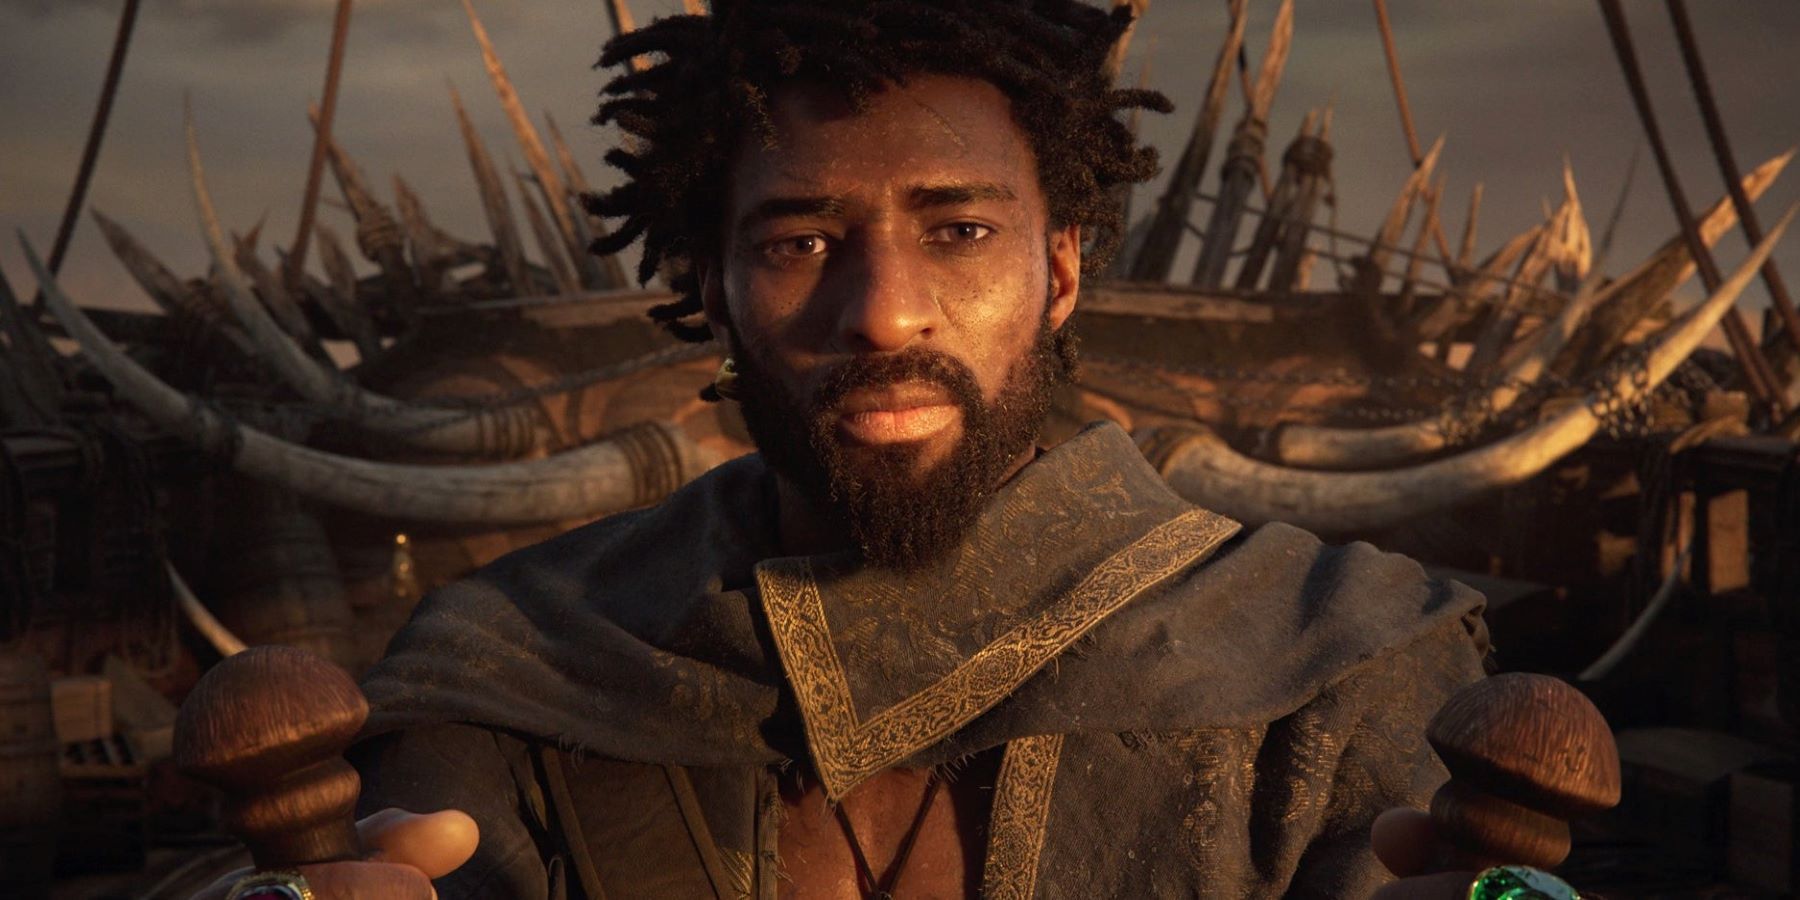 Skull and Bones protagonist at the helm of a ship